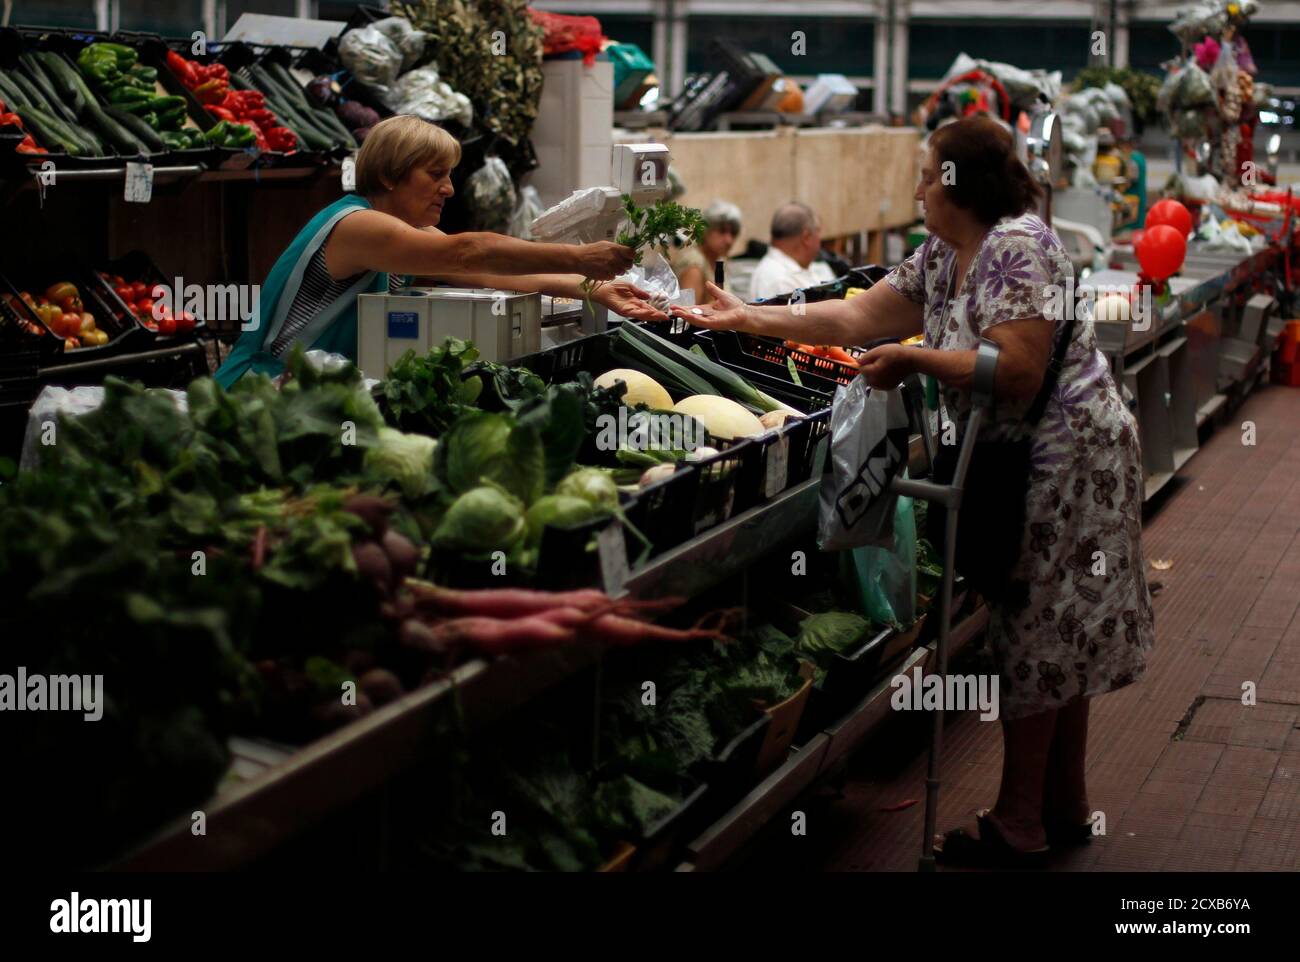 A woman buys parsley at the Ribeira market in Lisbon August 30 , 2011. The economic climate indicator for Portugal again worsened in August 2011, reaching the lowest level since May 2009, announced the National Statistics Institute. REUTERS/Rafael Marchante (PORTUGAL - Tags: SOCIETY BUSINESS) Stock Photo